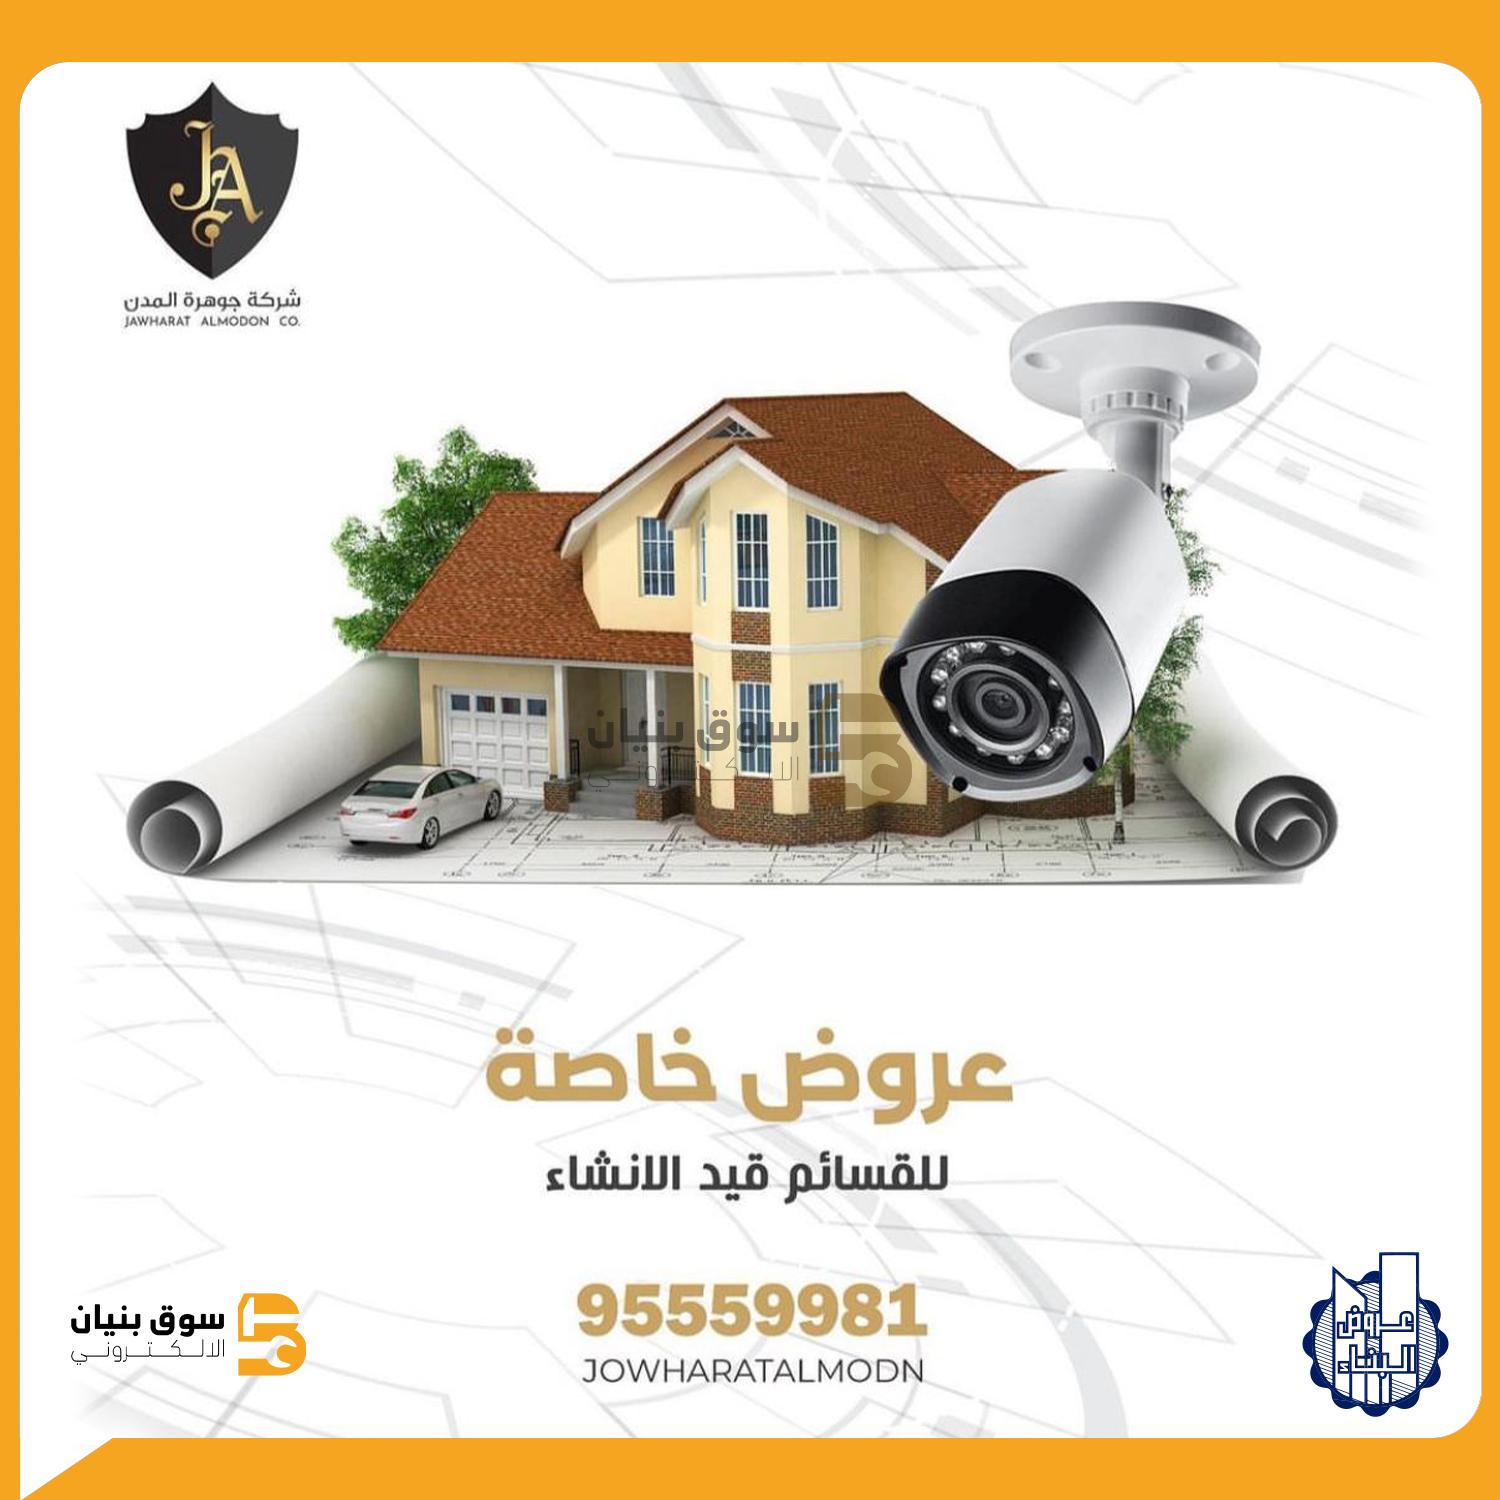 Jawharat Al-Modon Co. for Integrated Security Systems